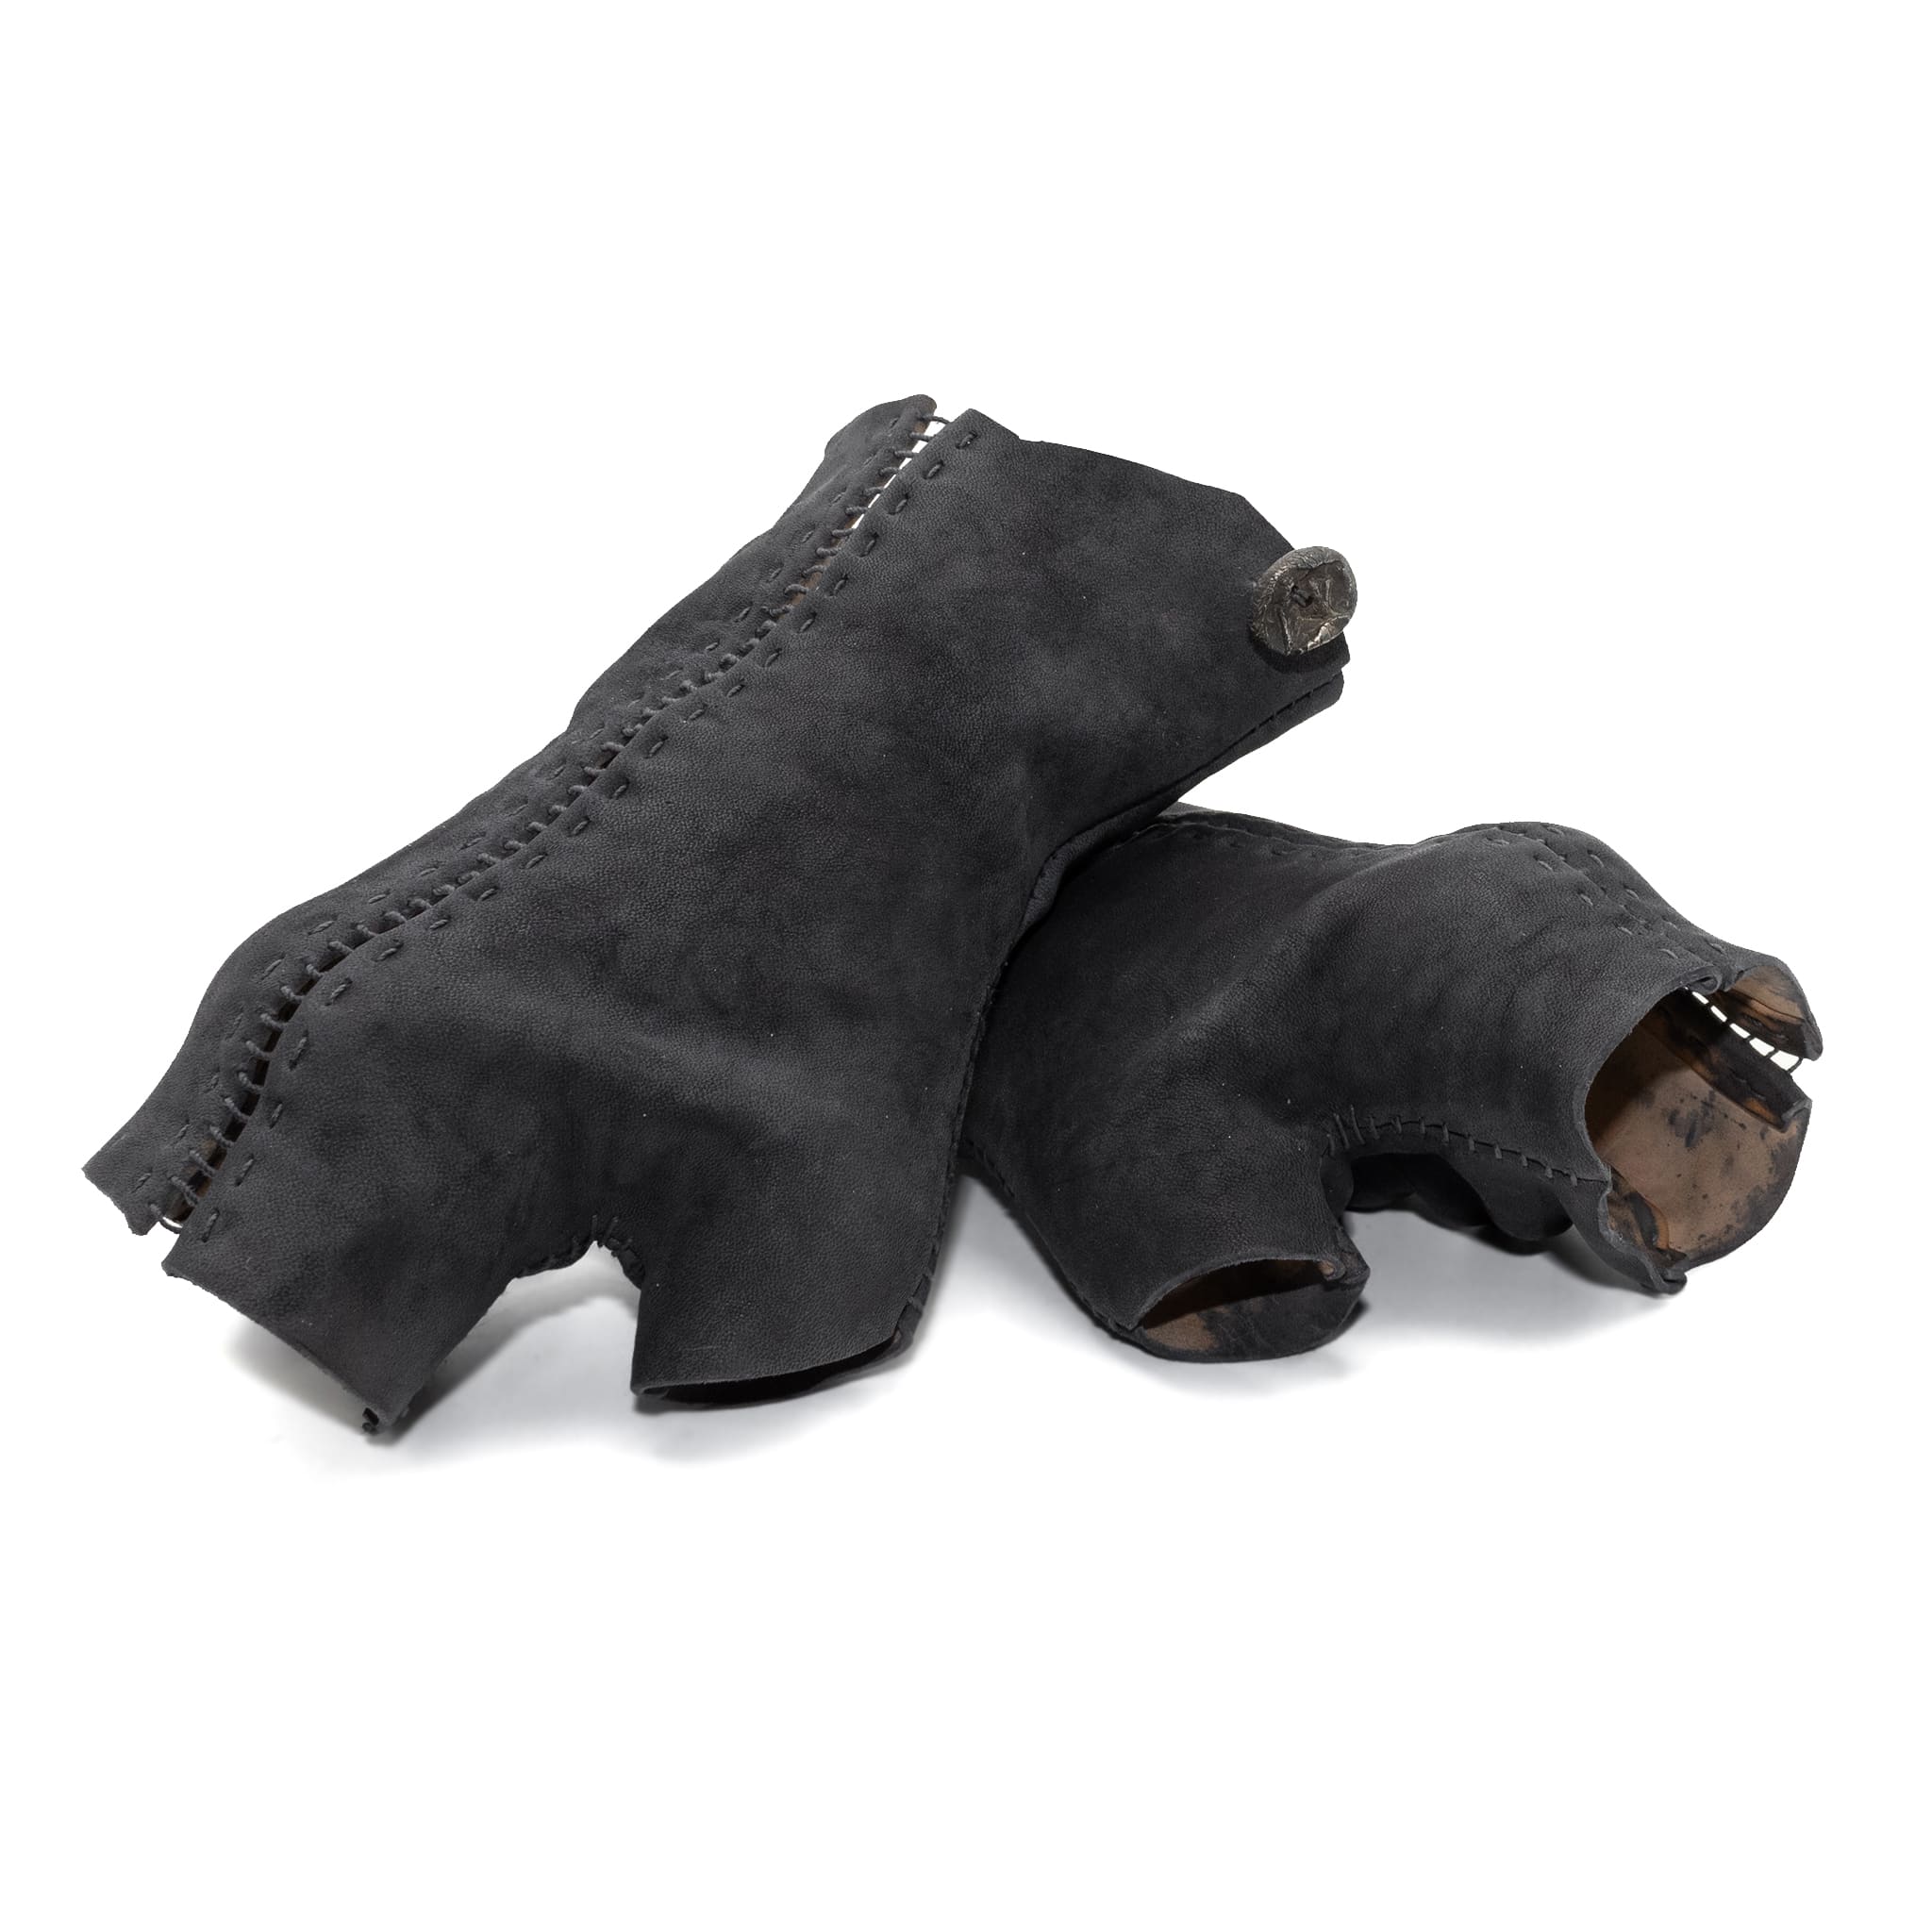 horse culatta open seam short leather gloves for men and women available online at atelierskn.com